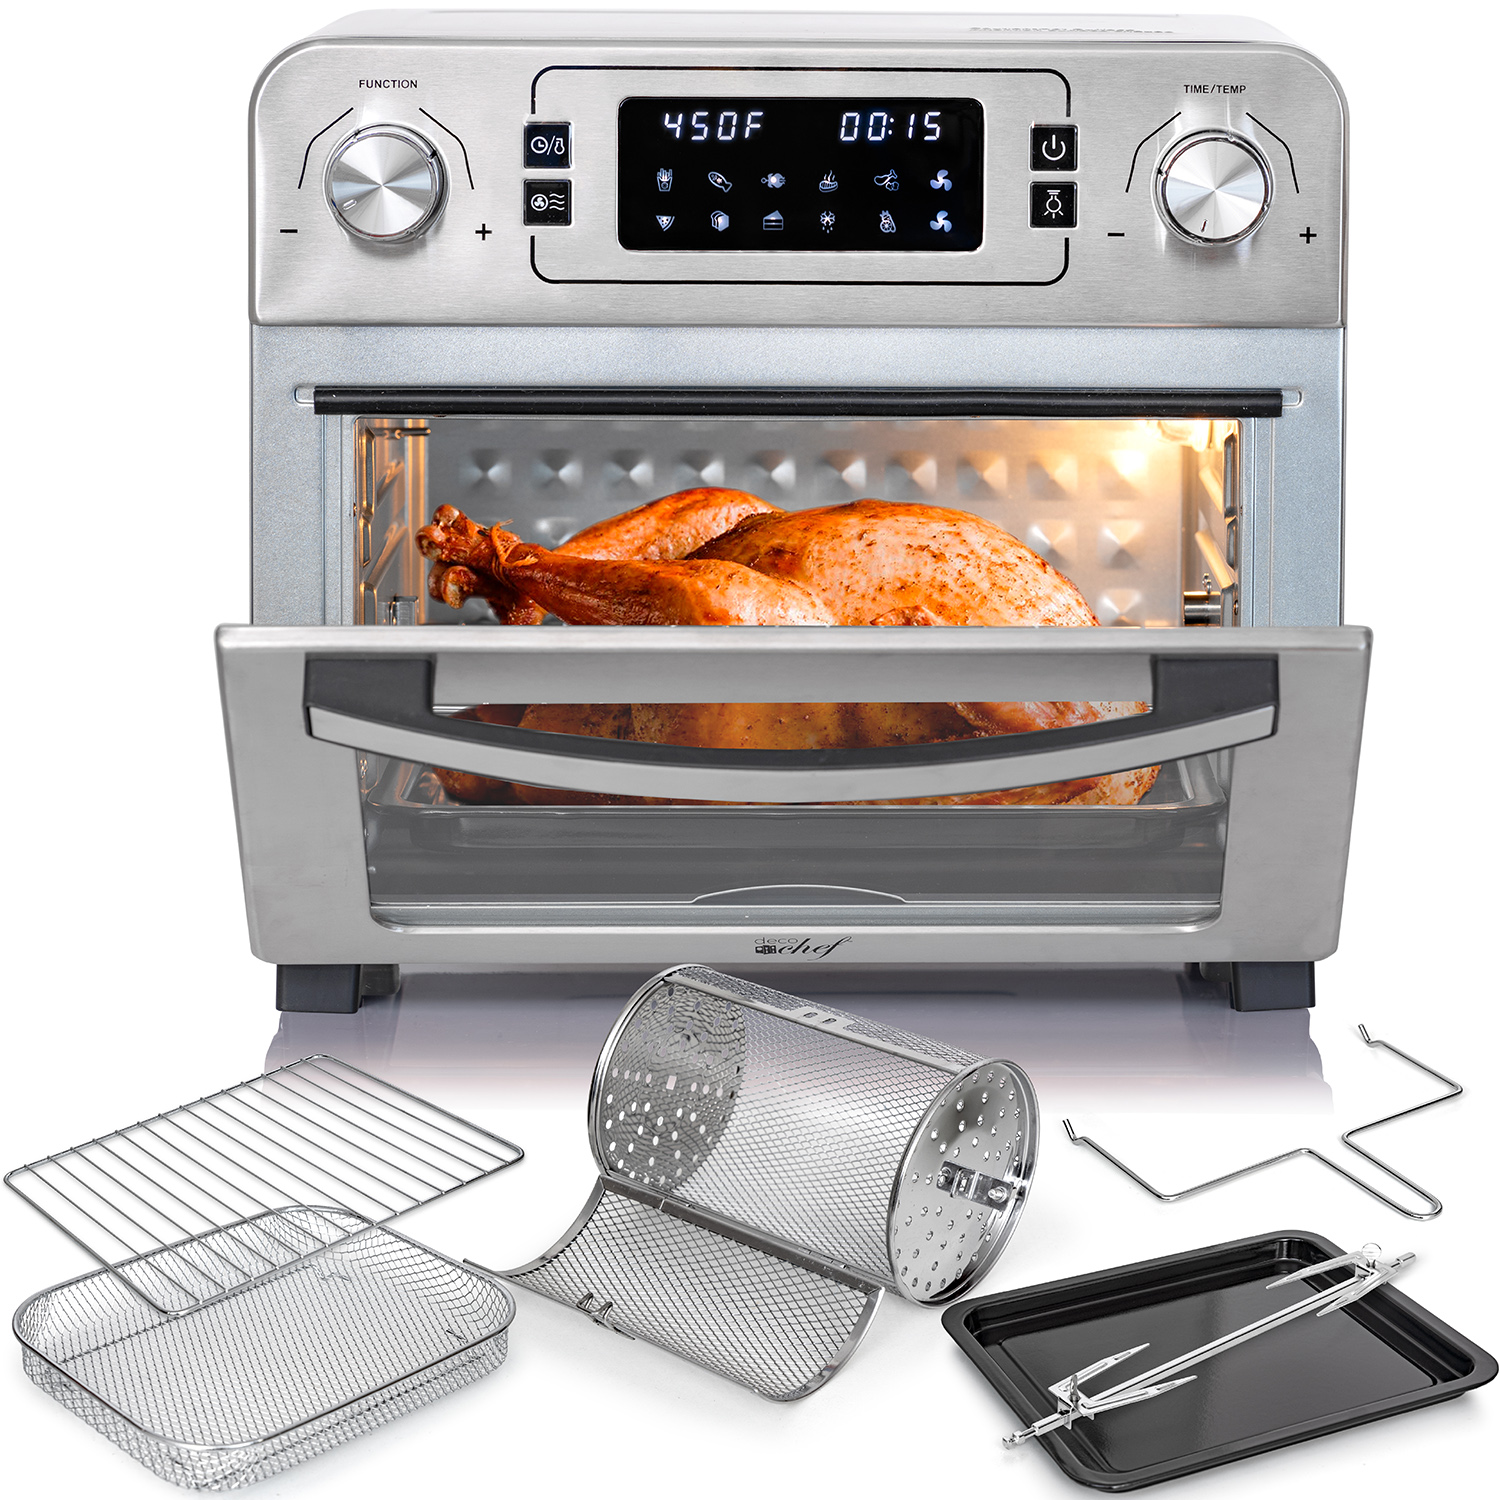 Deco Chef 24 QT Stainless Steel Countertop 1700 Watt Toaster Oven with Built-in Air Fryer and Included Rotisserie Assembly, Grill Rack, Frying Basket, and Baking Pan - image 1 of 11